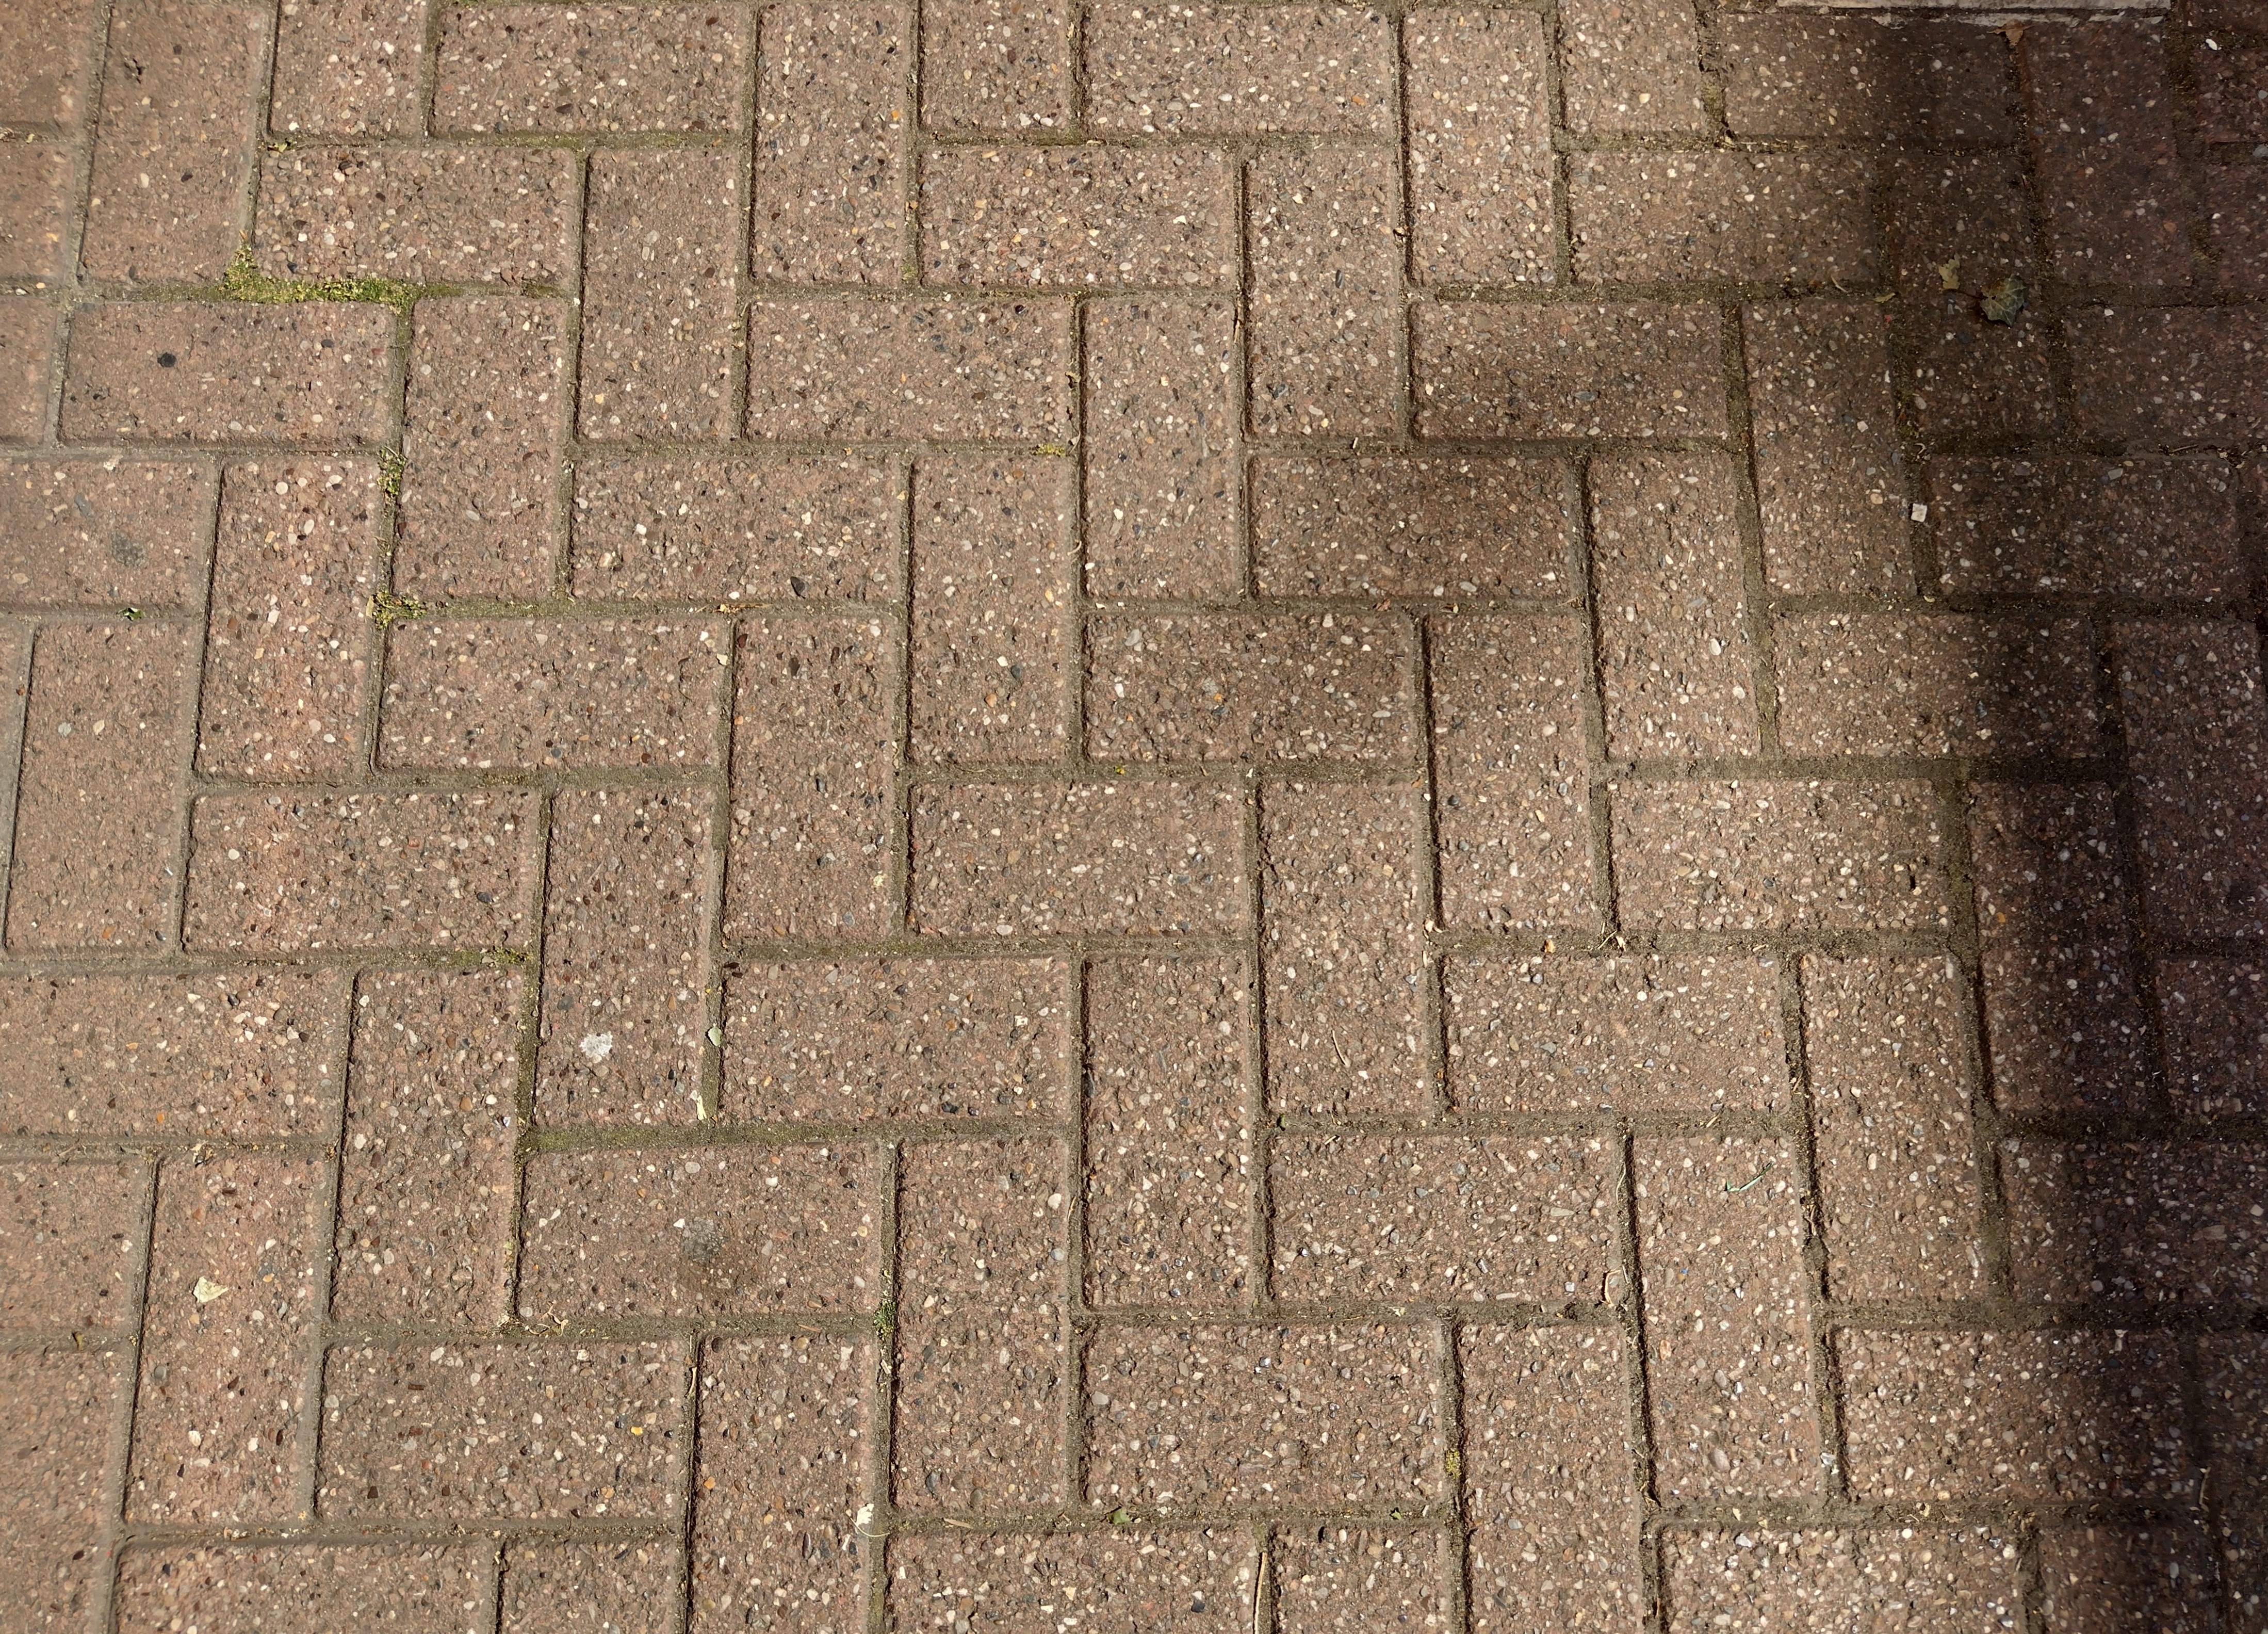 Fig: 89: Bricks in a herringbone pattern are common to pavements